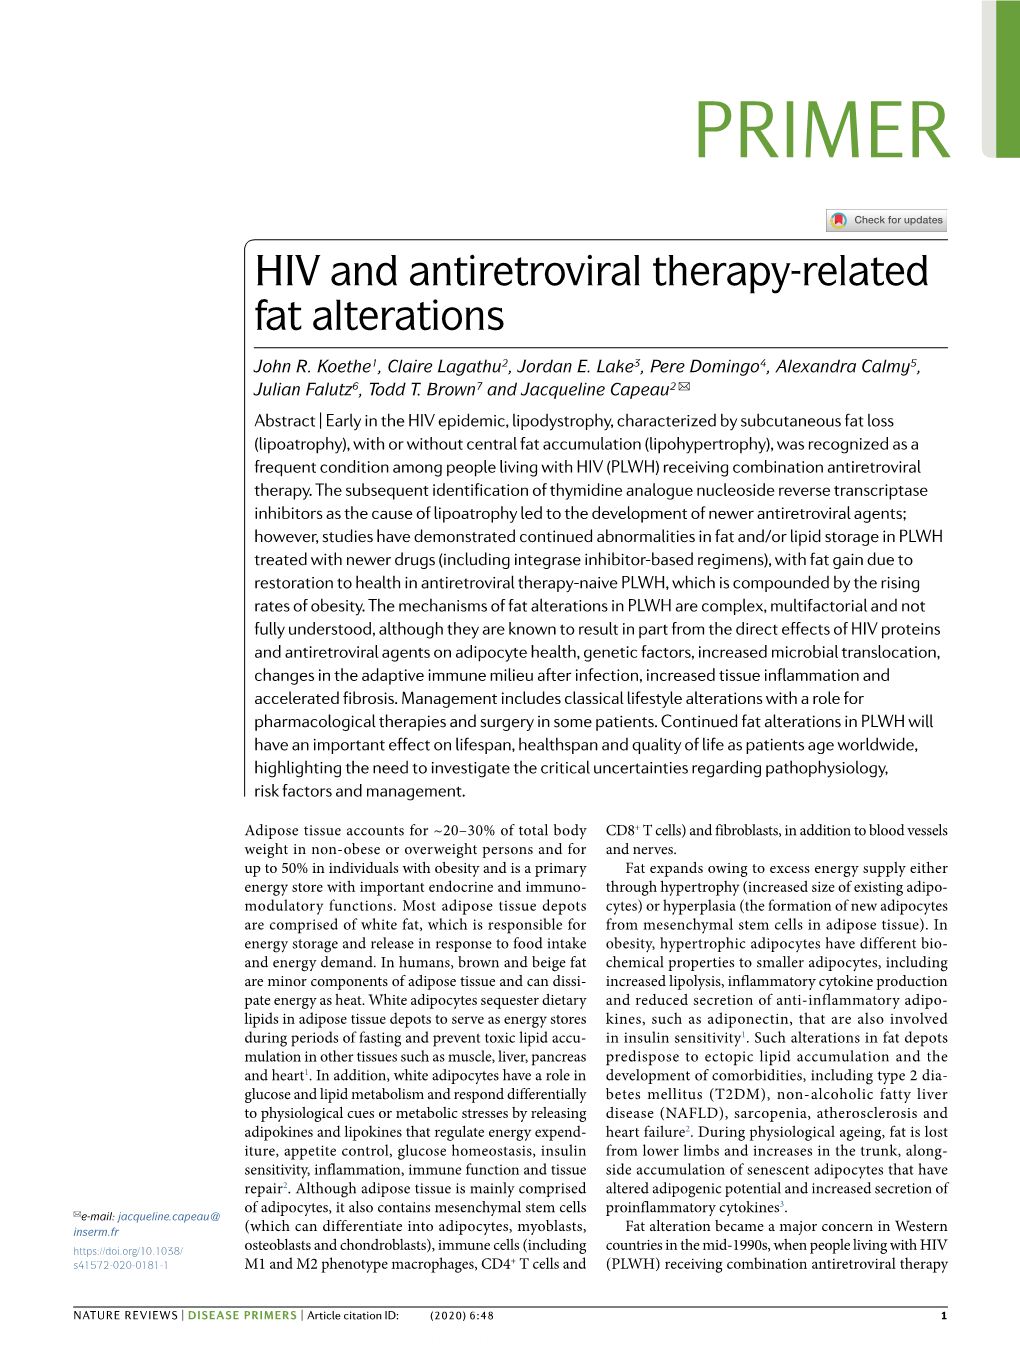 HIV and Antiretroviral Therapy-Related Fat Alterations